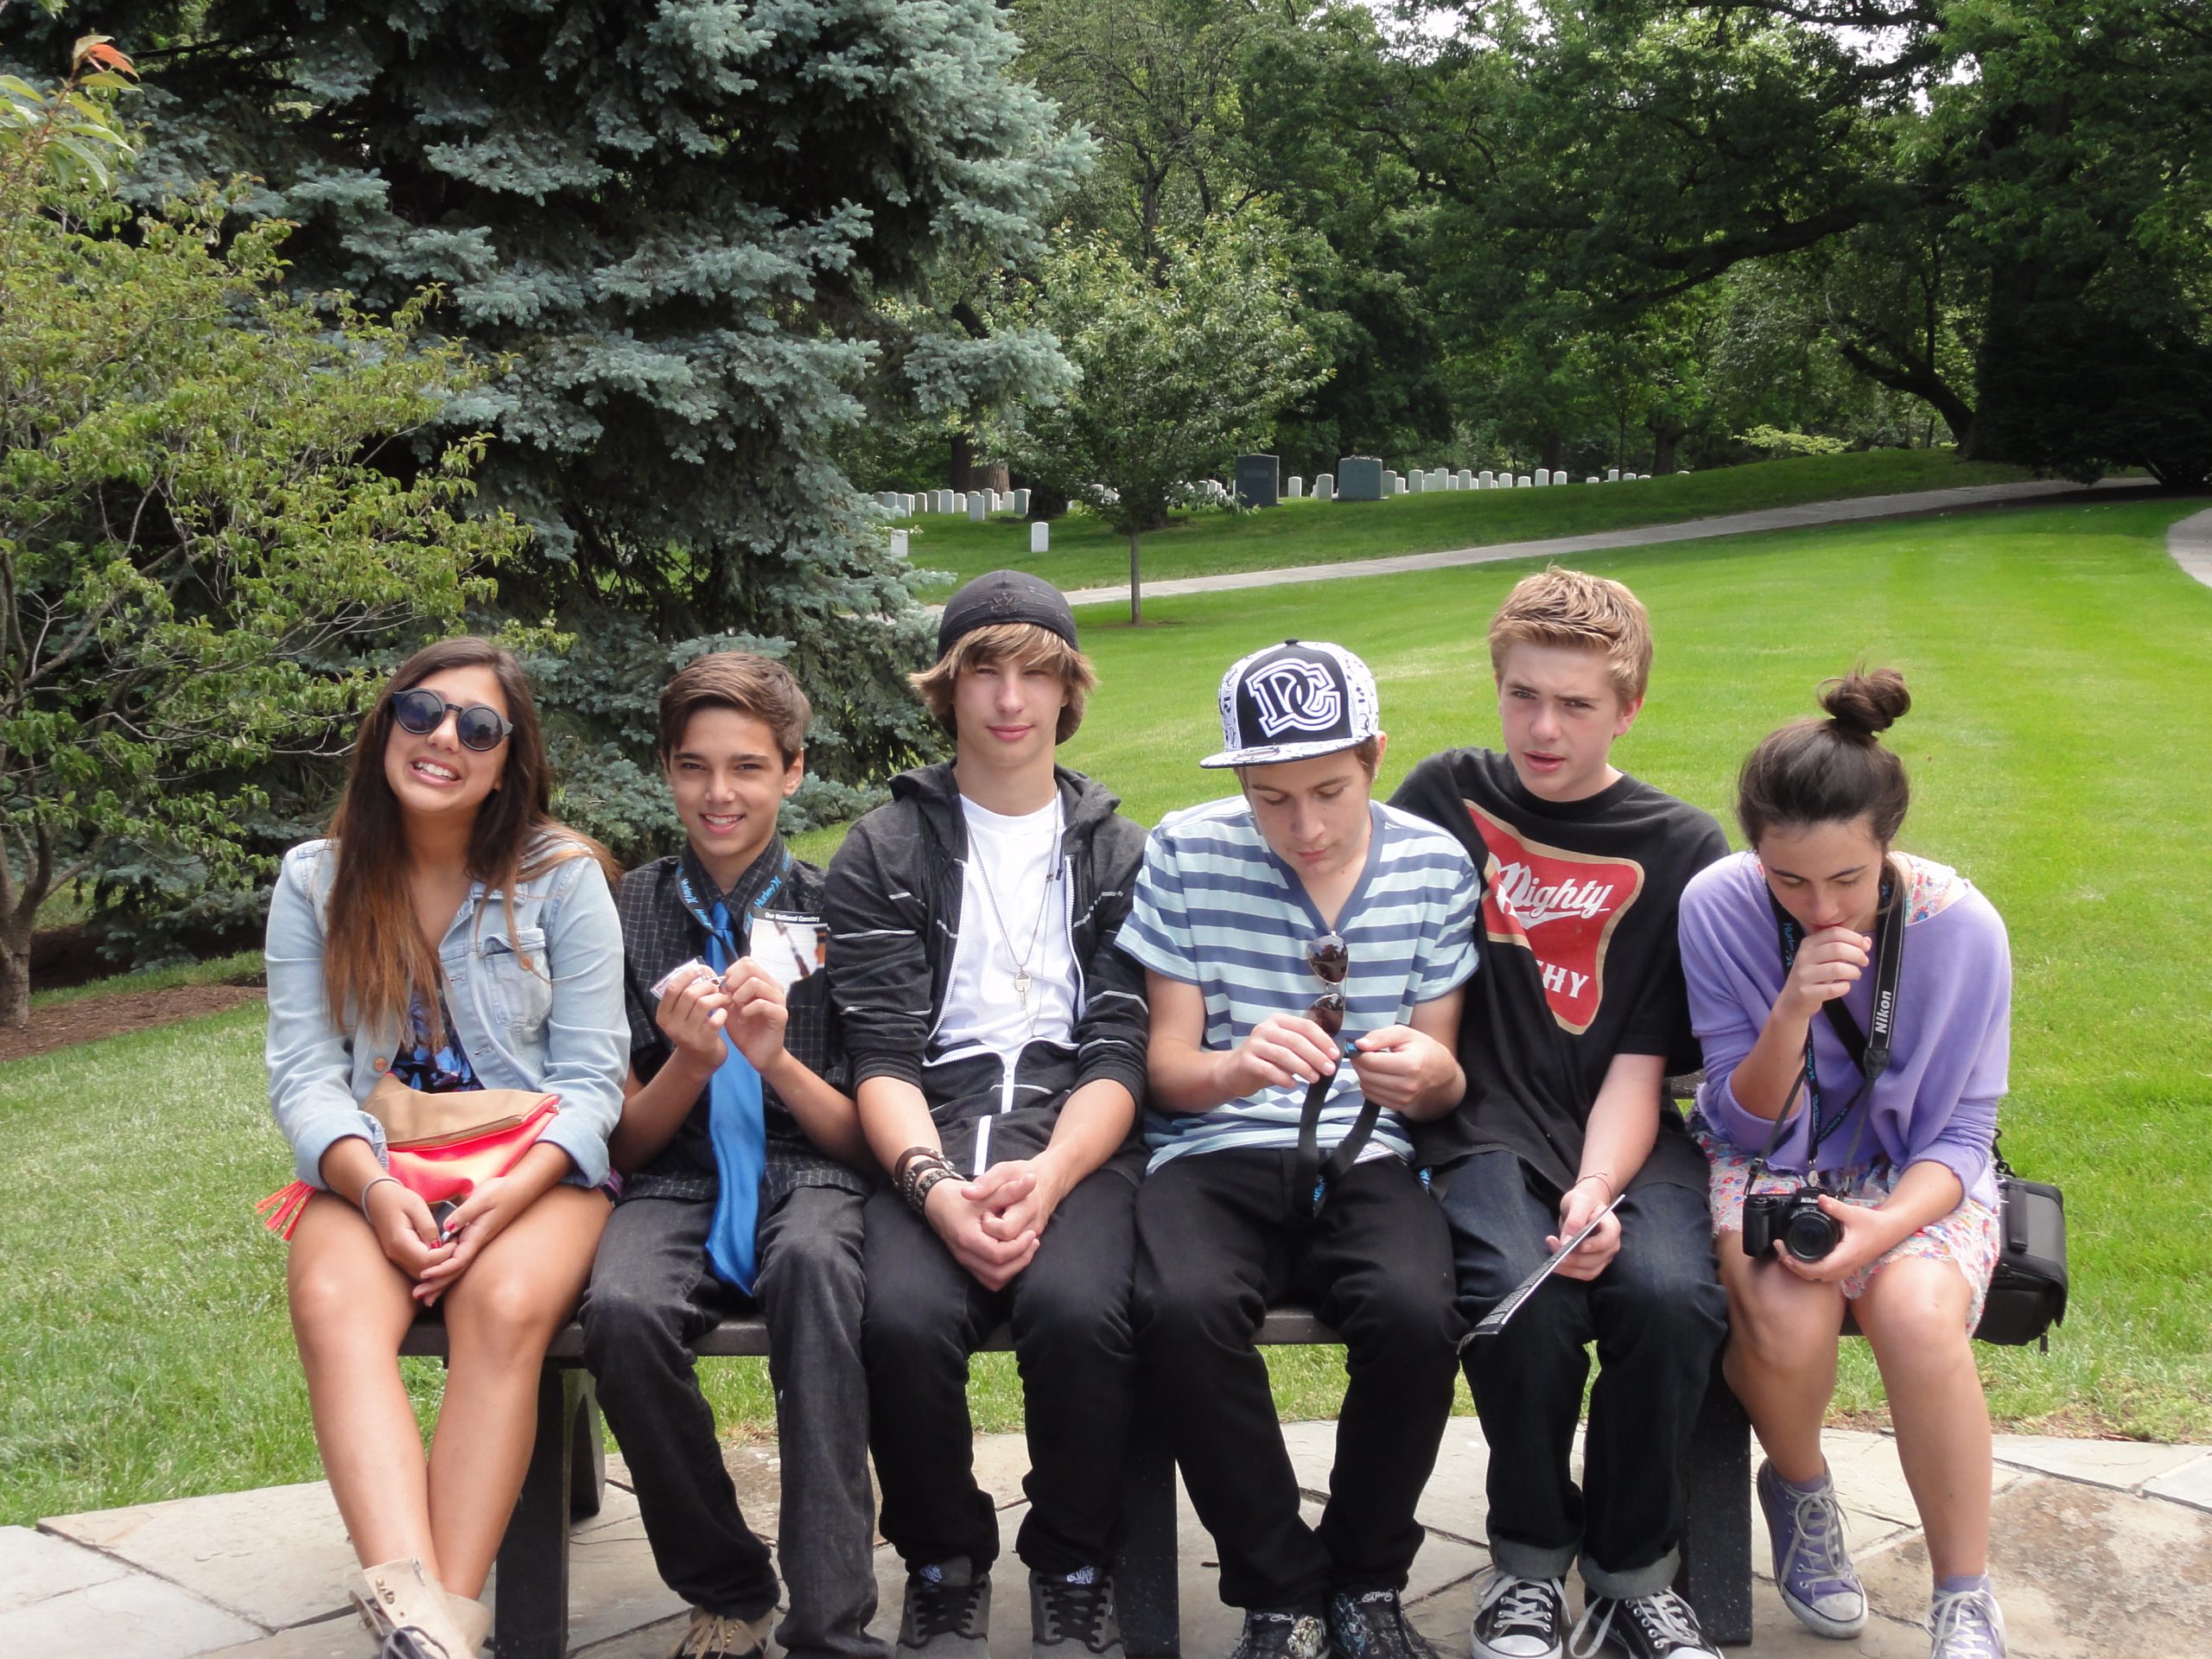 Six teenage boys and girls sitting on a bench in Arlington War Memorial Park